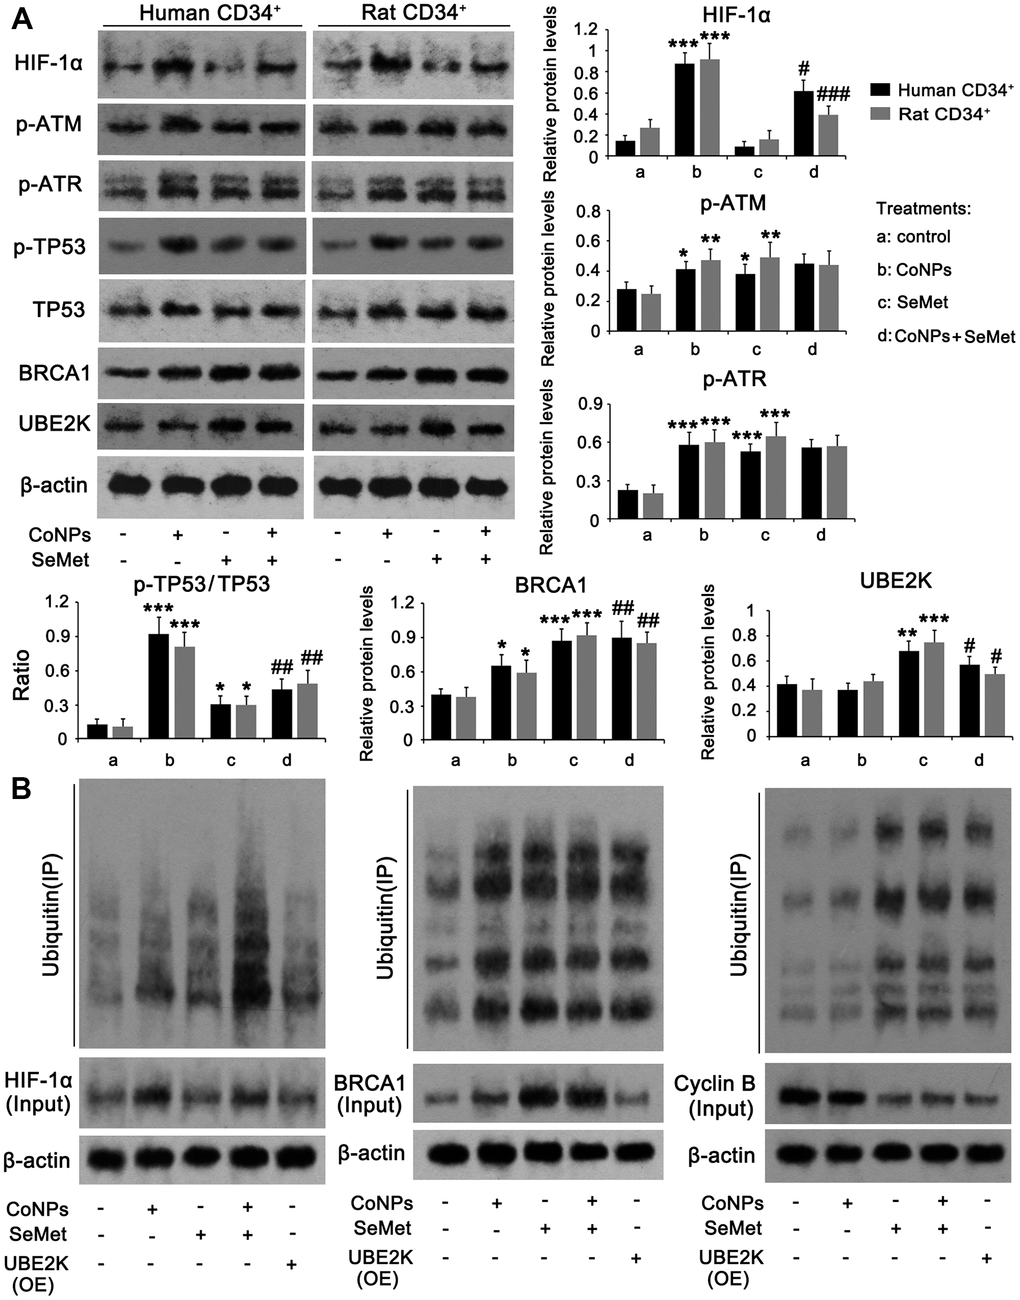 The regulatory effects of CoNPs and SeMet on DNA damage response signal. CD34+ HSC/HPCs were treated with 10 μM SeMet and 200 μM CoNPs, alone or in combination, followed by western blot (A) and Co-IP assay (B). In Co-IP assay, HIF-1α, BRCA1 and cyclin B proteins were immunoprecipitated and the enrichment of ubiquitin in these proteins was further determined by western blot. *p 